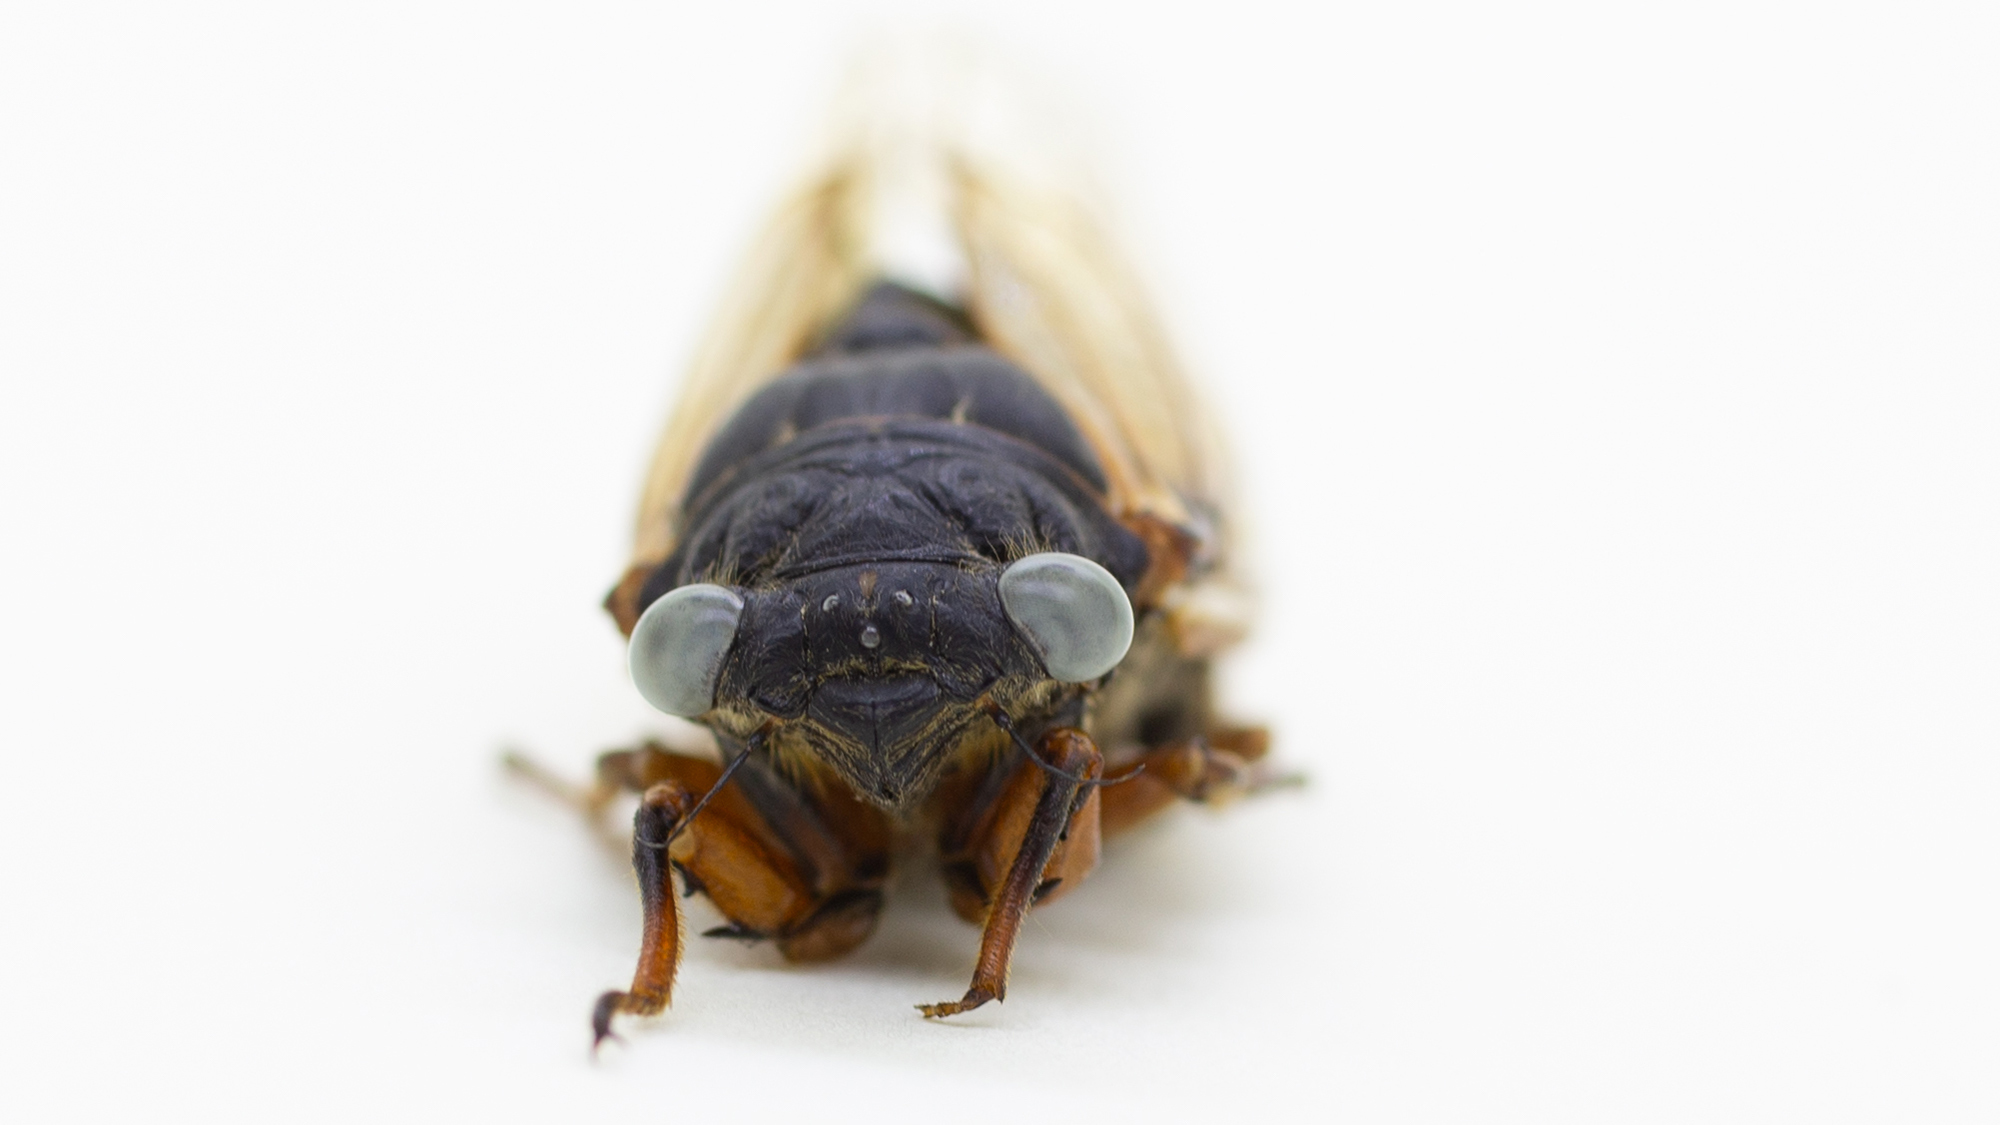 a close up of a cicada with blue eyes